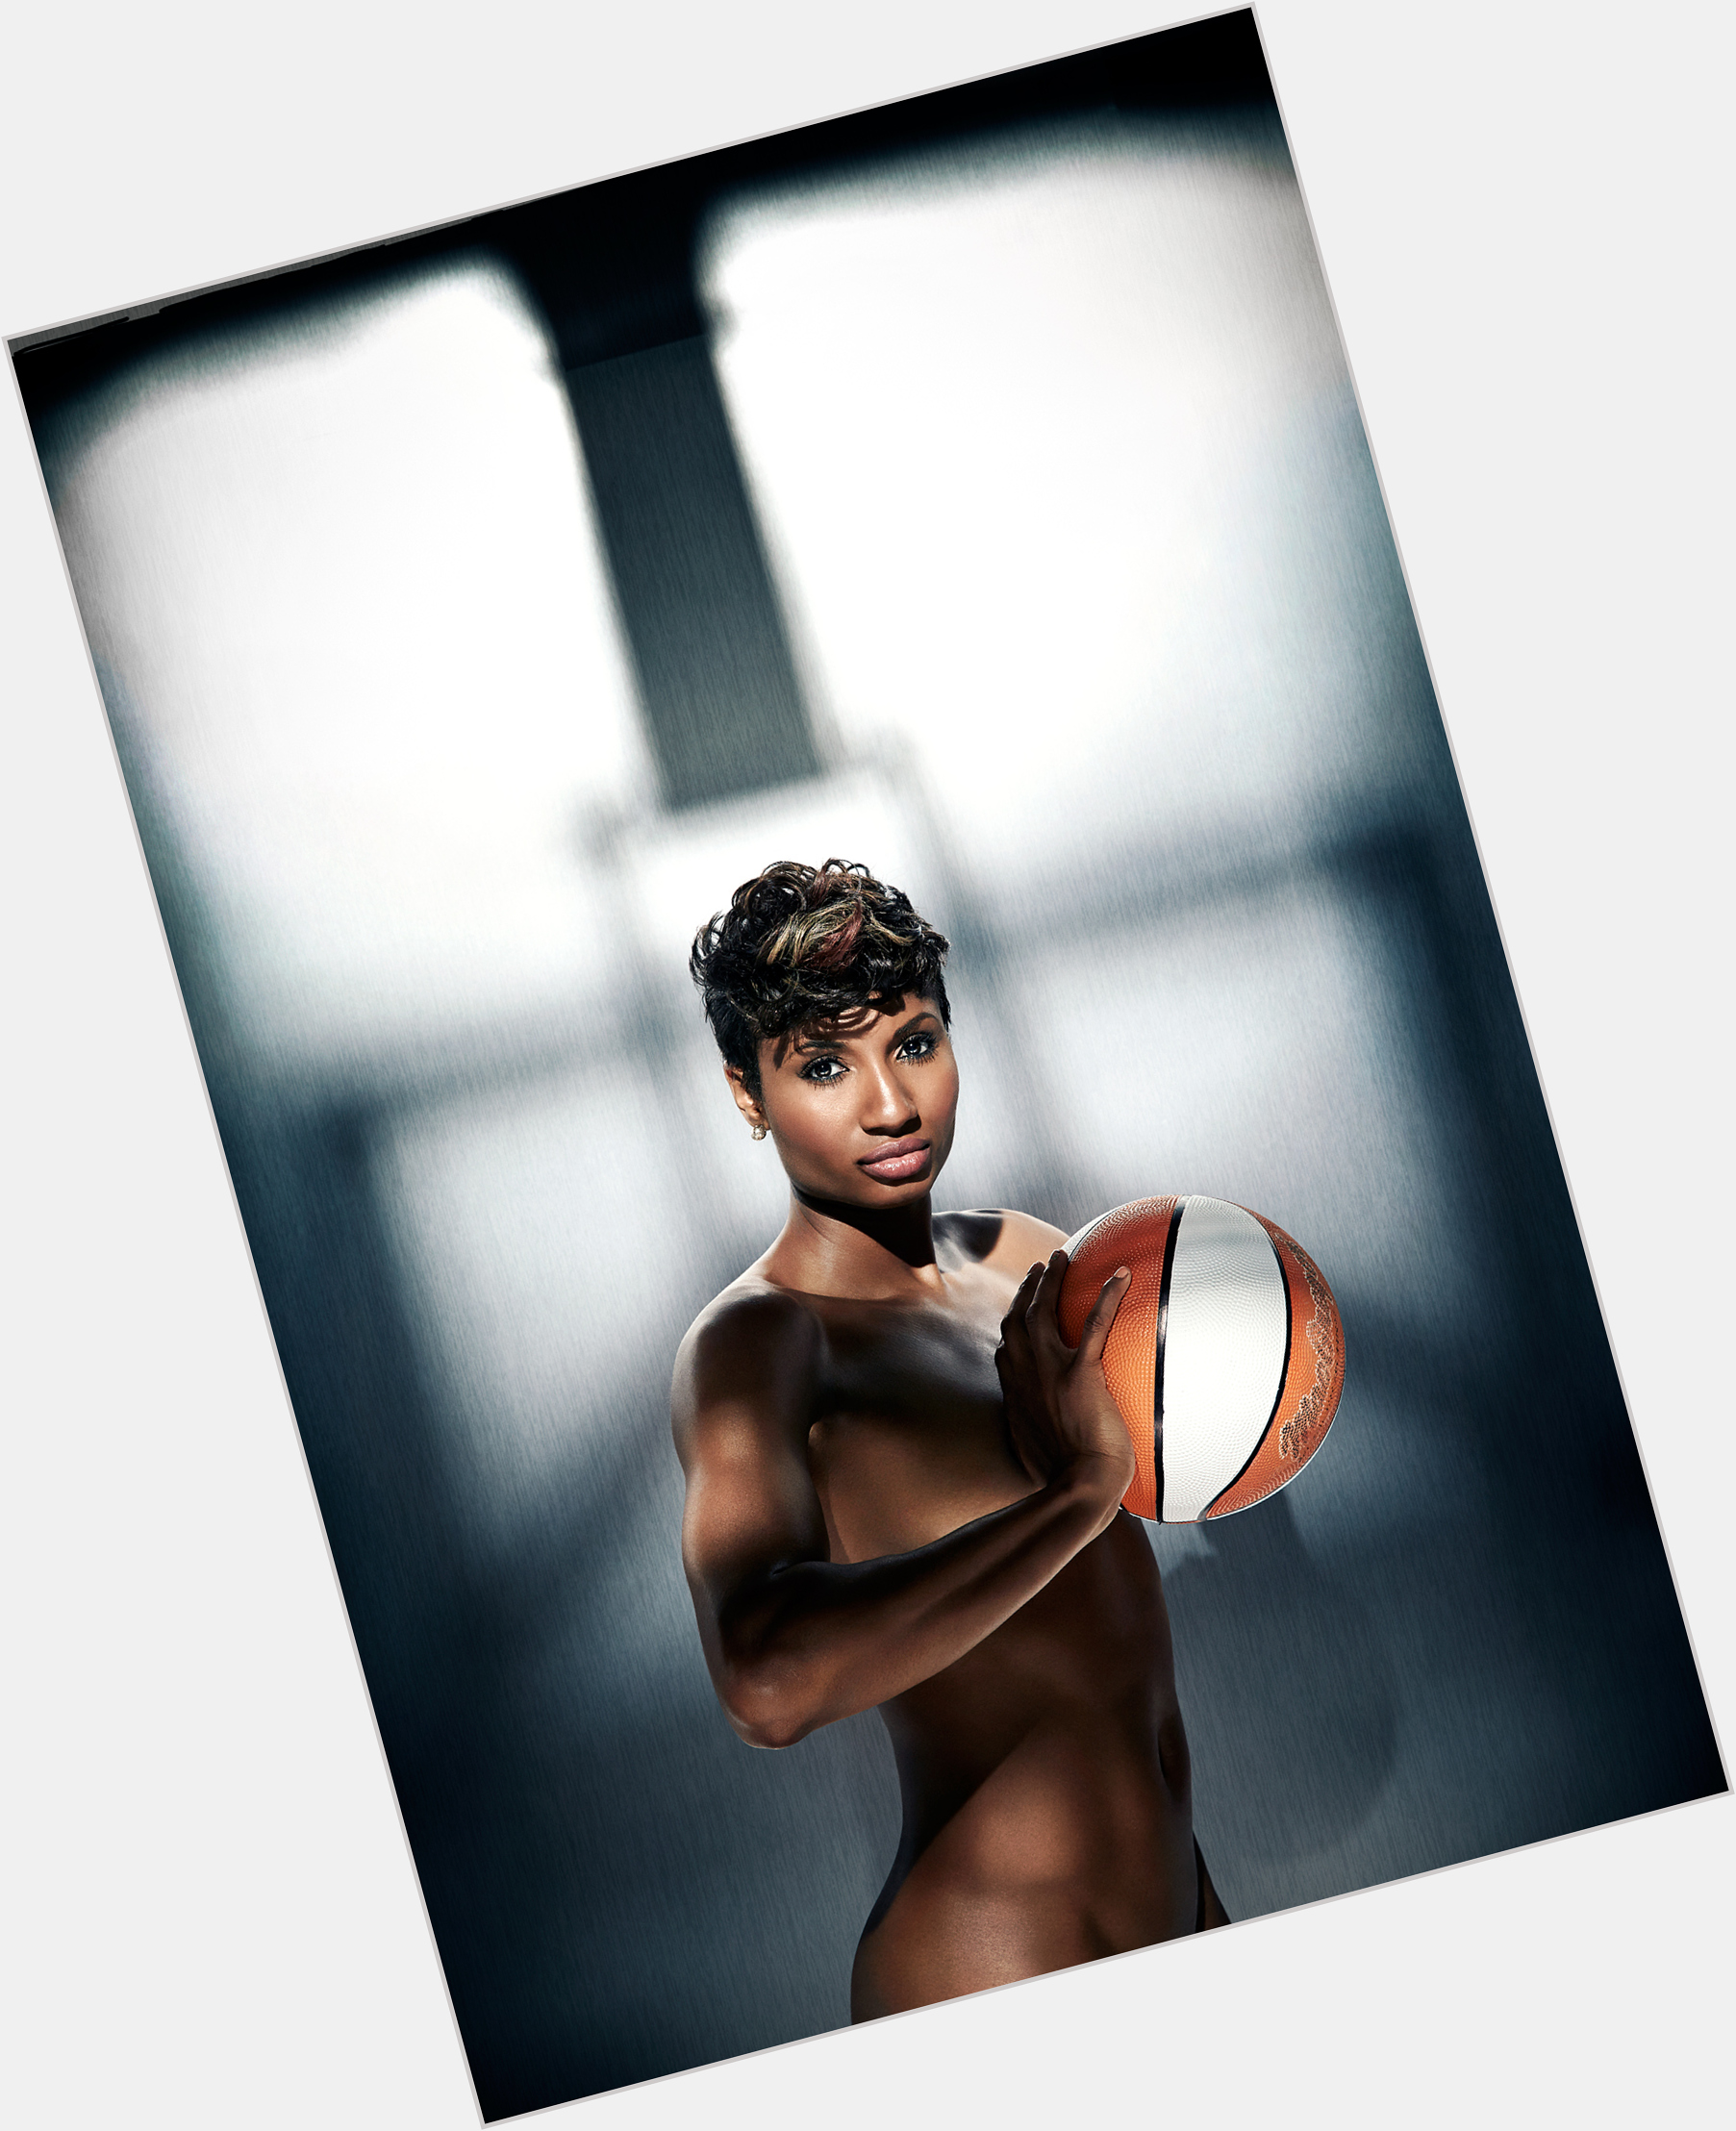 Https://fanpagepress.net/m/A/Angel Mccoughtry Where Who 3